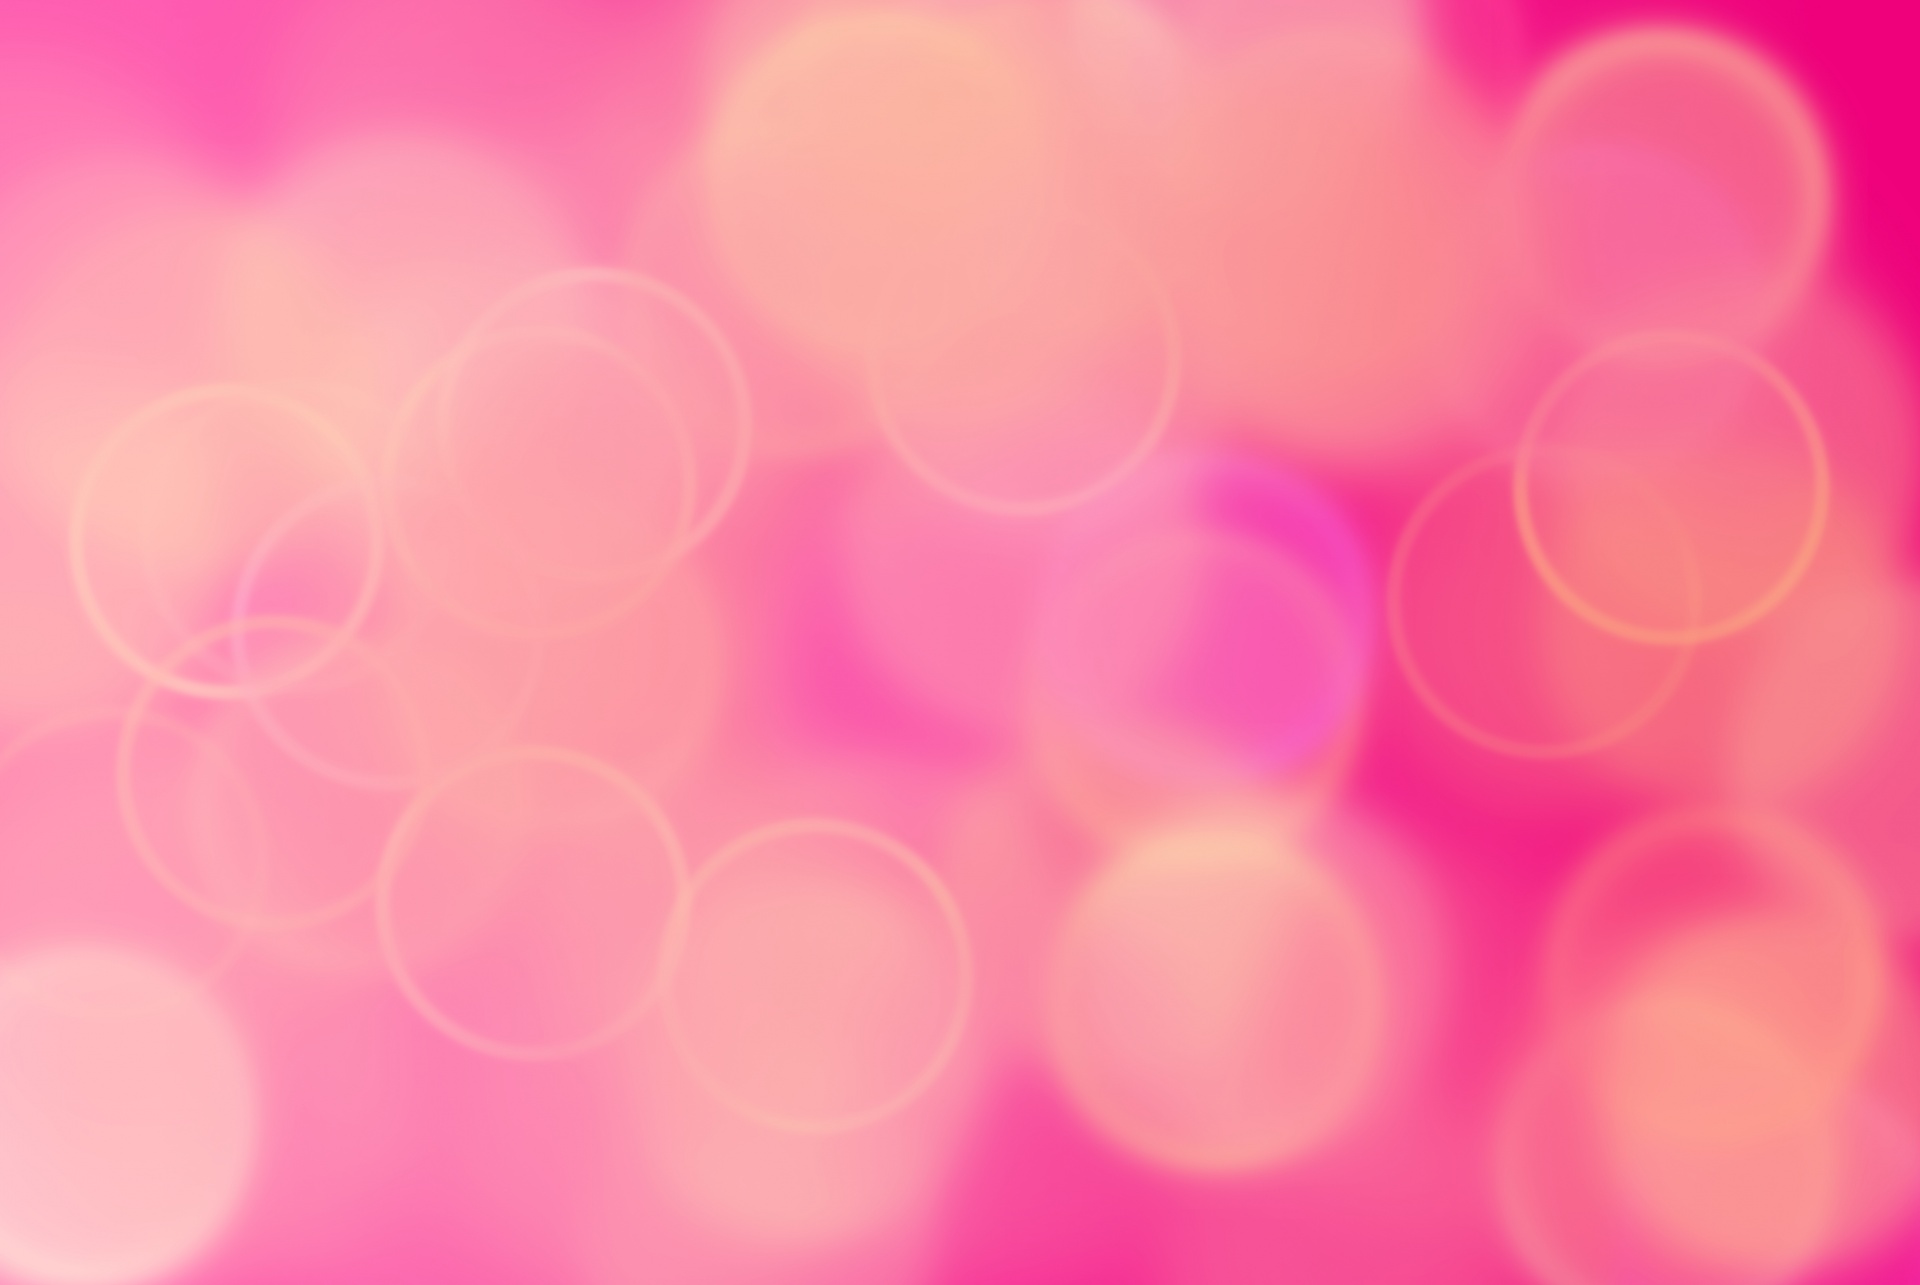 Asbtract background with bokeh effect